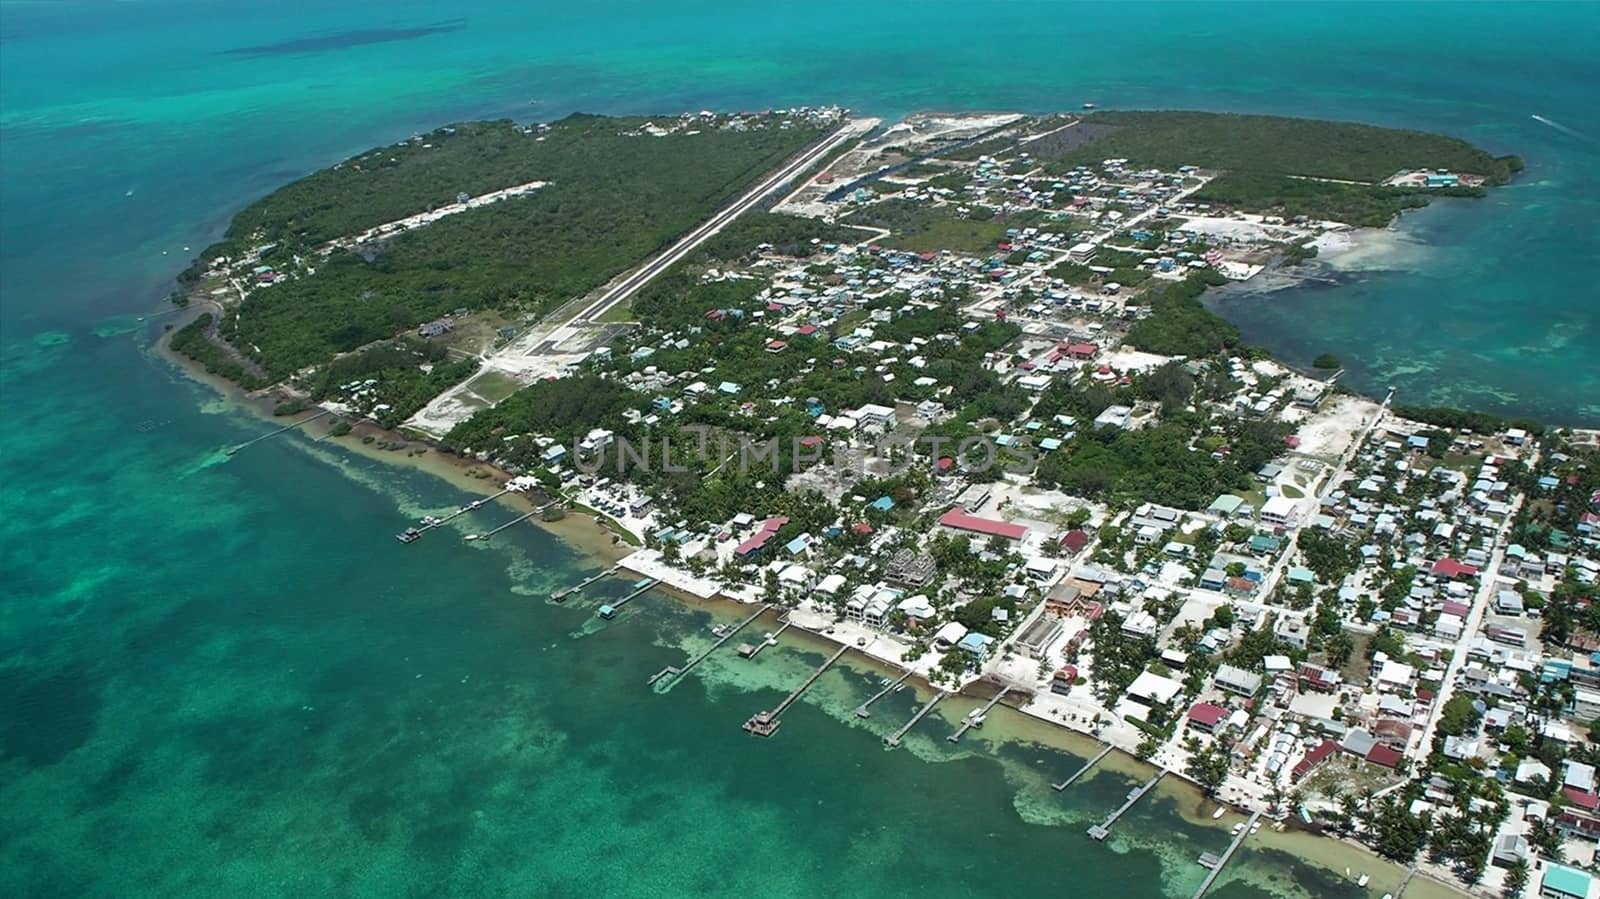 Ambergris caye aerial photo from plane window belize central america caribbean by AndrewUK